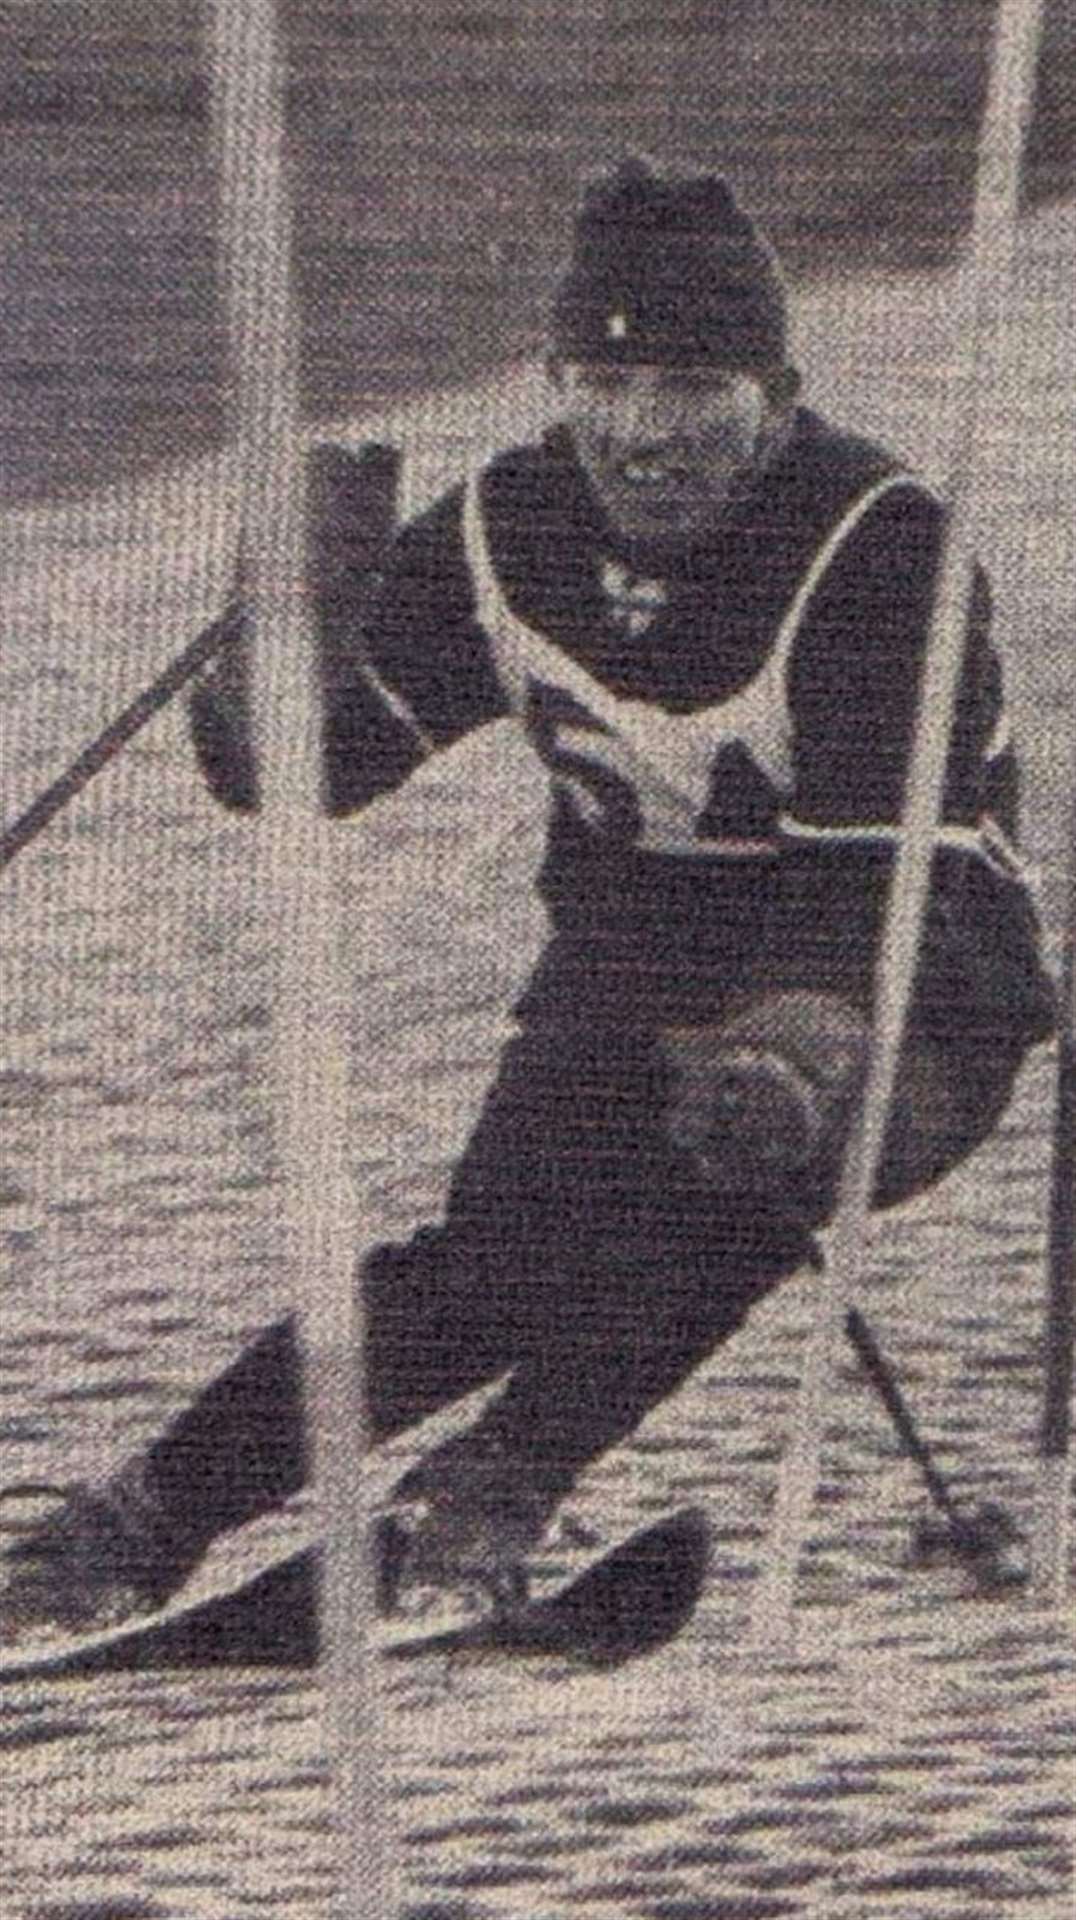 Hans Kuwall training at Hillend in Edinburgh in his younger days.